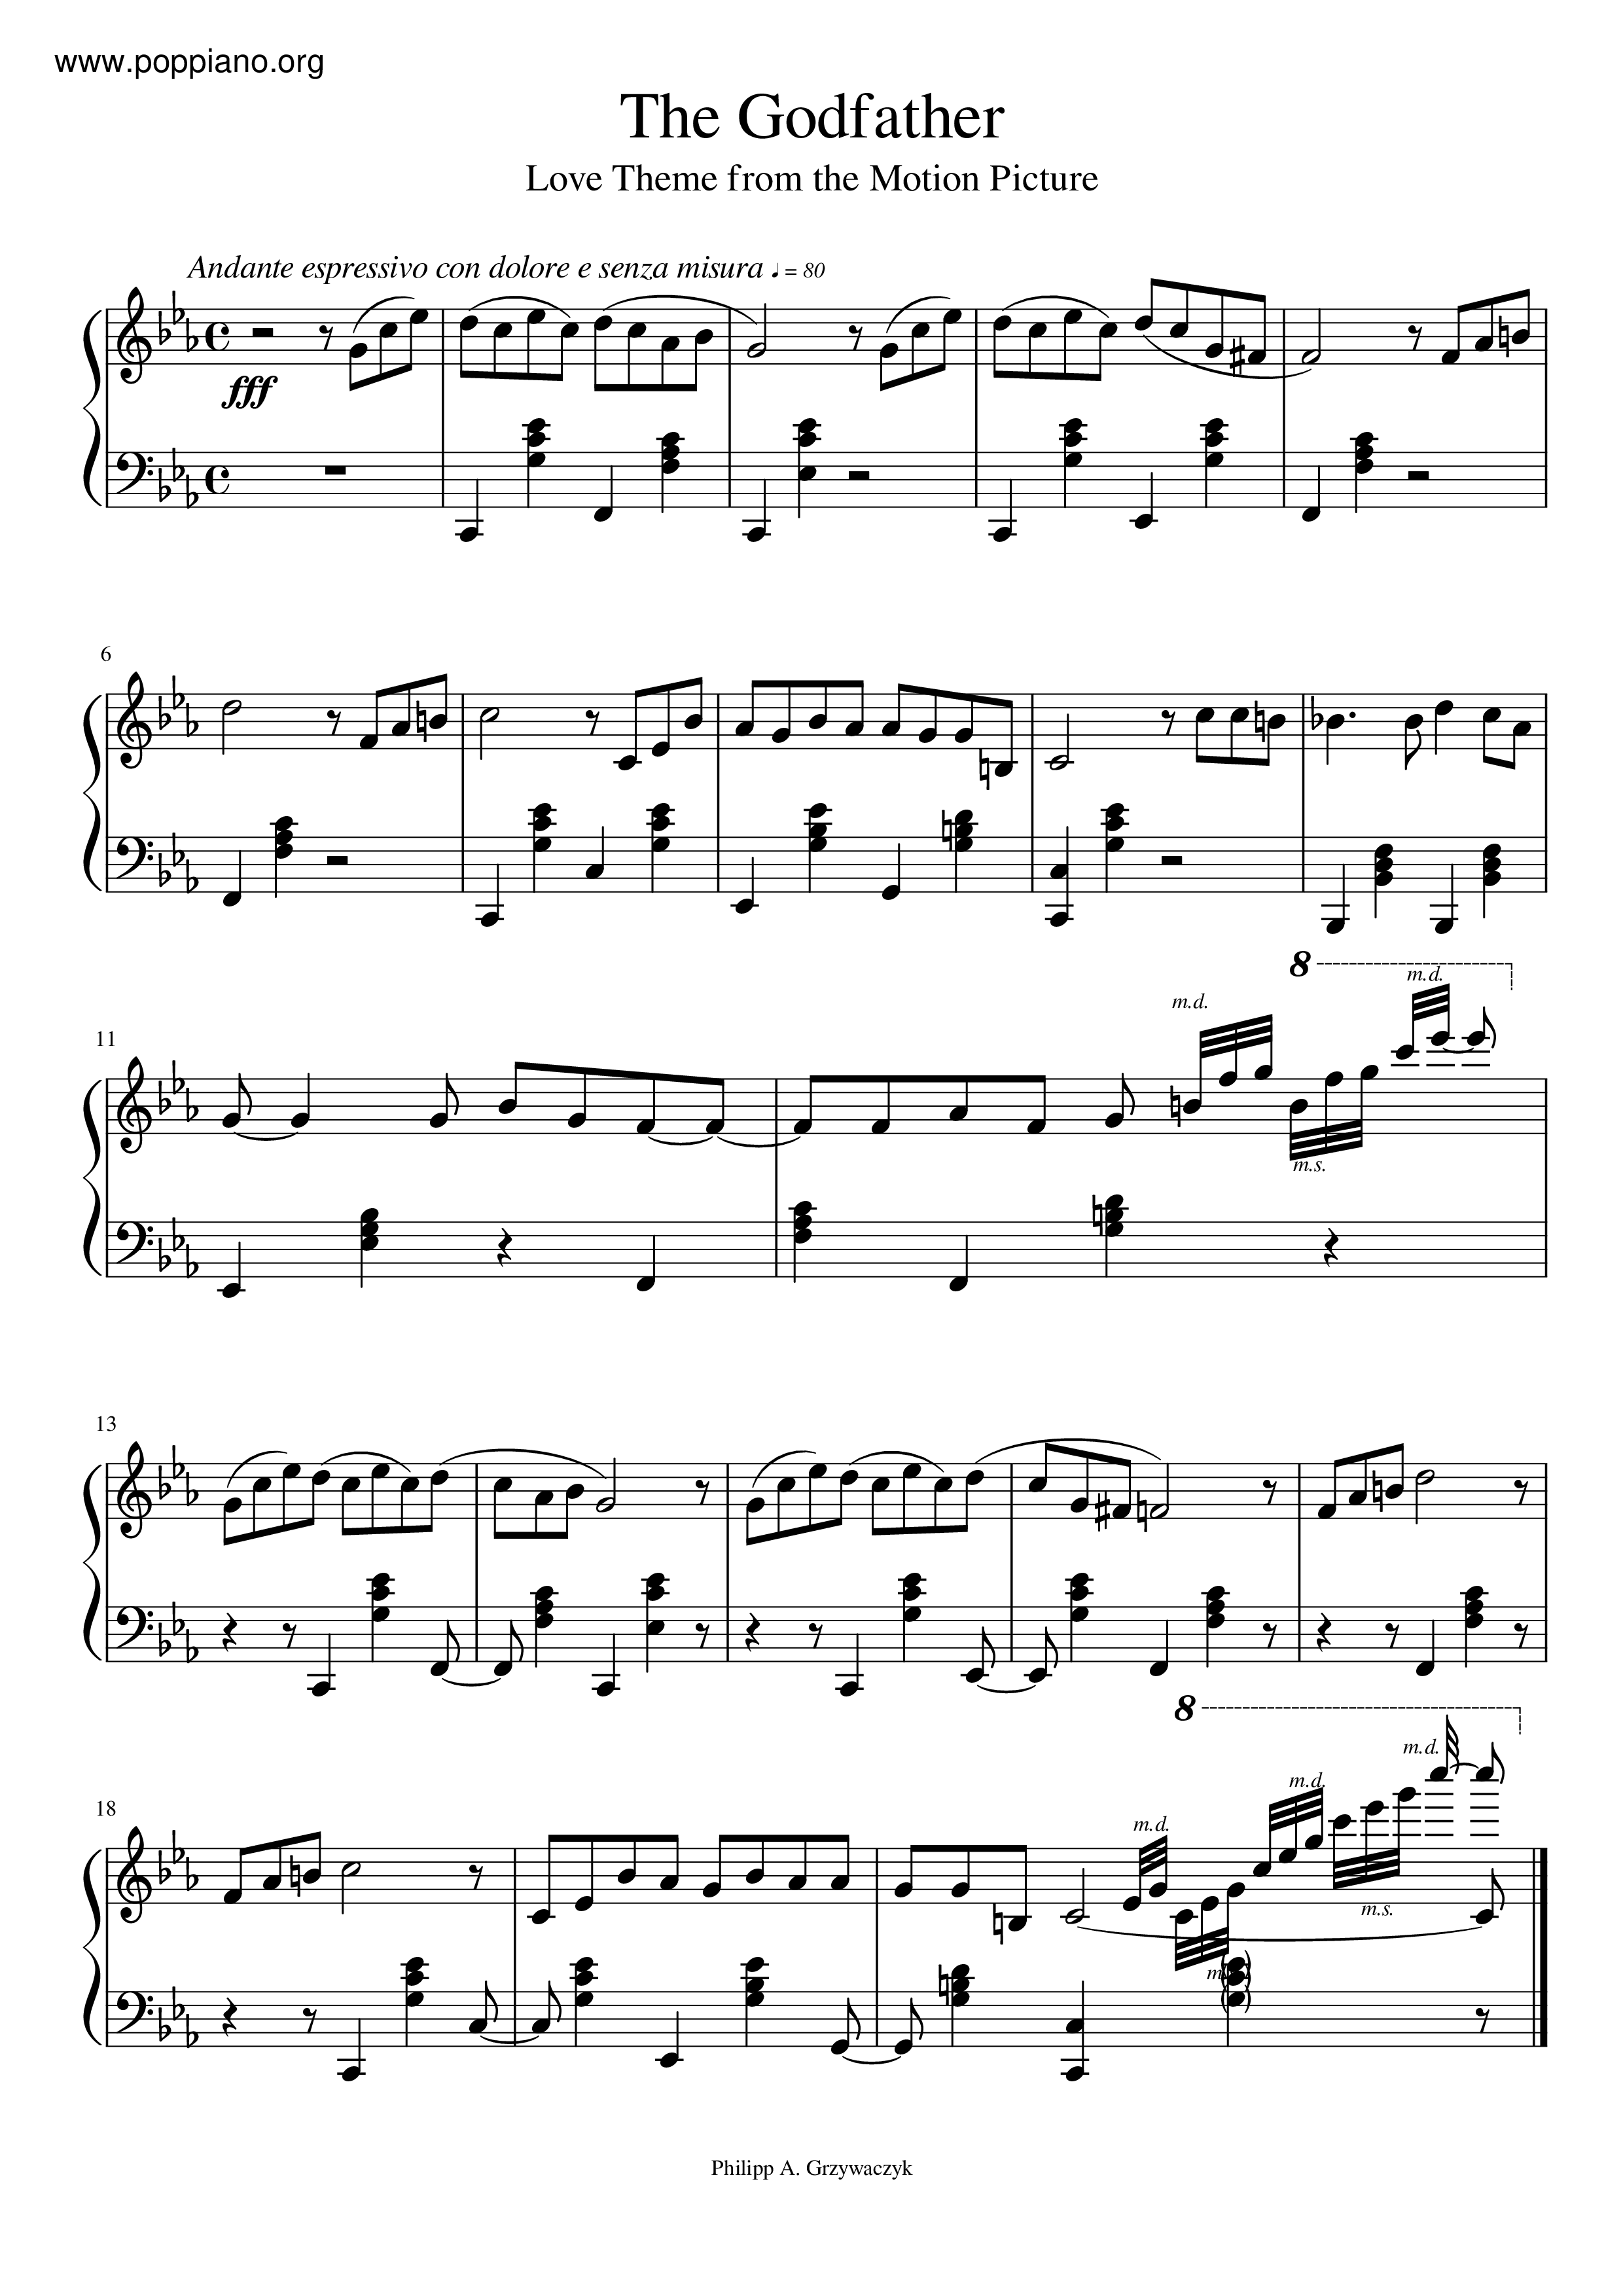 Love Theme From The Godfather (Speak Softly Love) Score